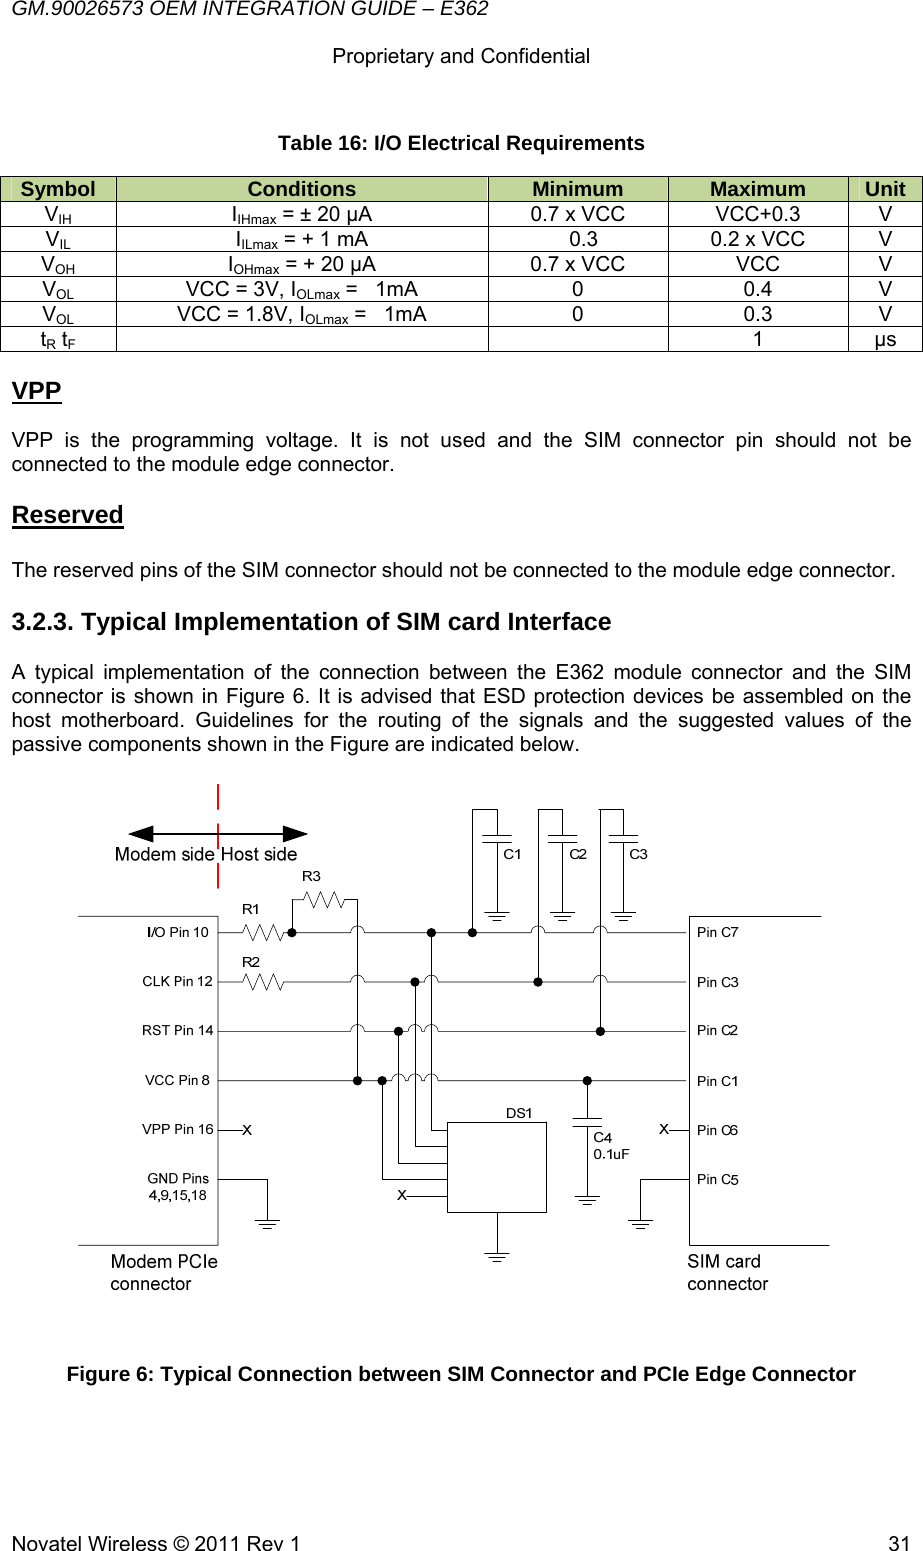 GM.90026573 OEM INTEGRATION GUIDE – E362      Proprietary and Confidential   Novatel Wireless © 2011 Rev 1  31Table 16: I/O Electrical Requirements Symbol  Conditions  Minimum  Maximum  Unit VIH IIHmax = ± 20 µA  0.7 x VCC  VCC+0.3  V VIL IILmax = + 1 mA    0.3  0.2 x VCC  V VOH IOHmax = + 20 µA  0.7 x VCC  VCC  V VOL  VCC = 3V, IOLmax =   1mA  0  0.4  V VOL  VCC = 1.8V, IOLmax =   1mA  0  0.3  V tR tF    1 µs  VPP  VPP is the programming voltage. It is not used and the SIM connector pin should not be connected to the module edge connector.  Reserved  The reserved pins of the SIM connector should not be connected to the module edge connector. 3.2.3. Typical Implementation of SIM card Interface A typical implementation of the connection between the E362 module connector and the SIM connector is shown in Figure 6. It is advised that ESD protection devices be assembled on the host motherboard. Guidelines for the routing of the signals and the suggested values of the passive components shown in the Figure are indicated below.   Figure 6: Typical Connection between SIM Connector and PCIe Edge Connector   